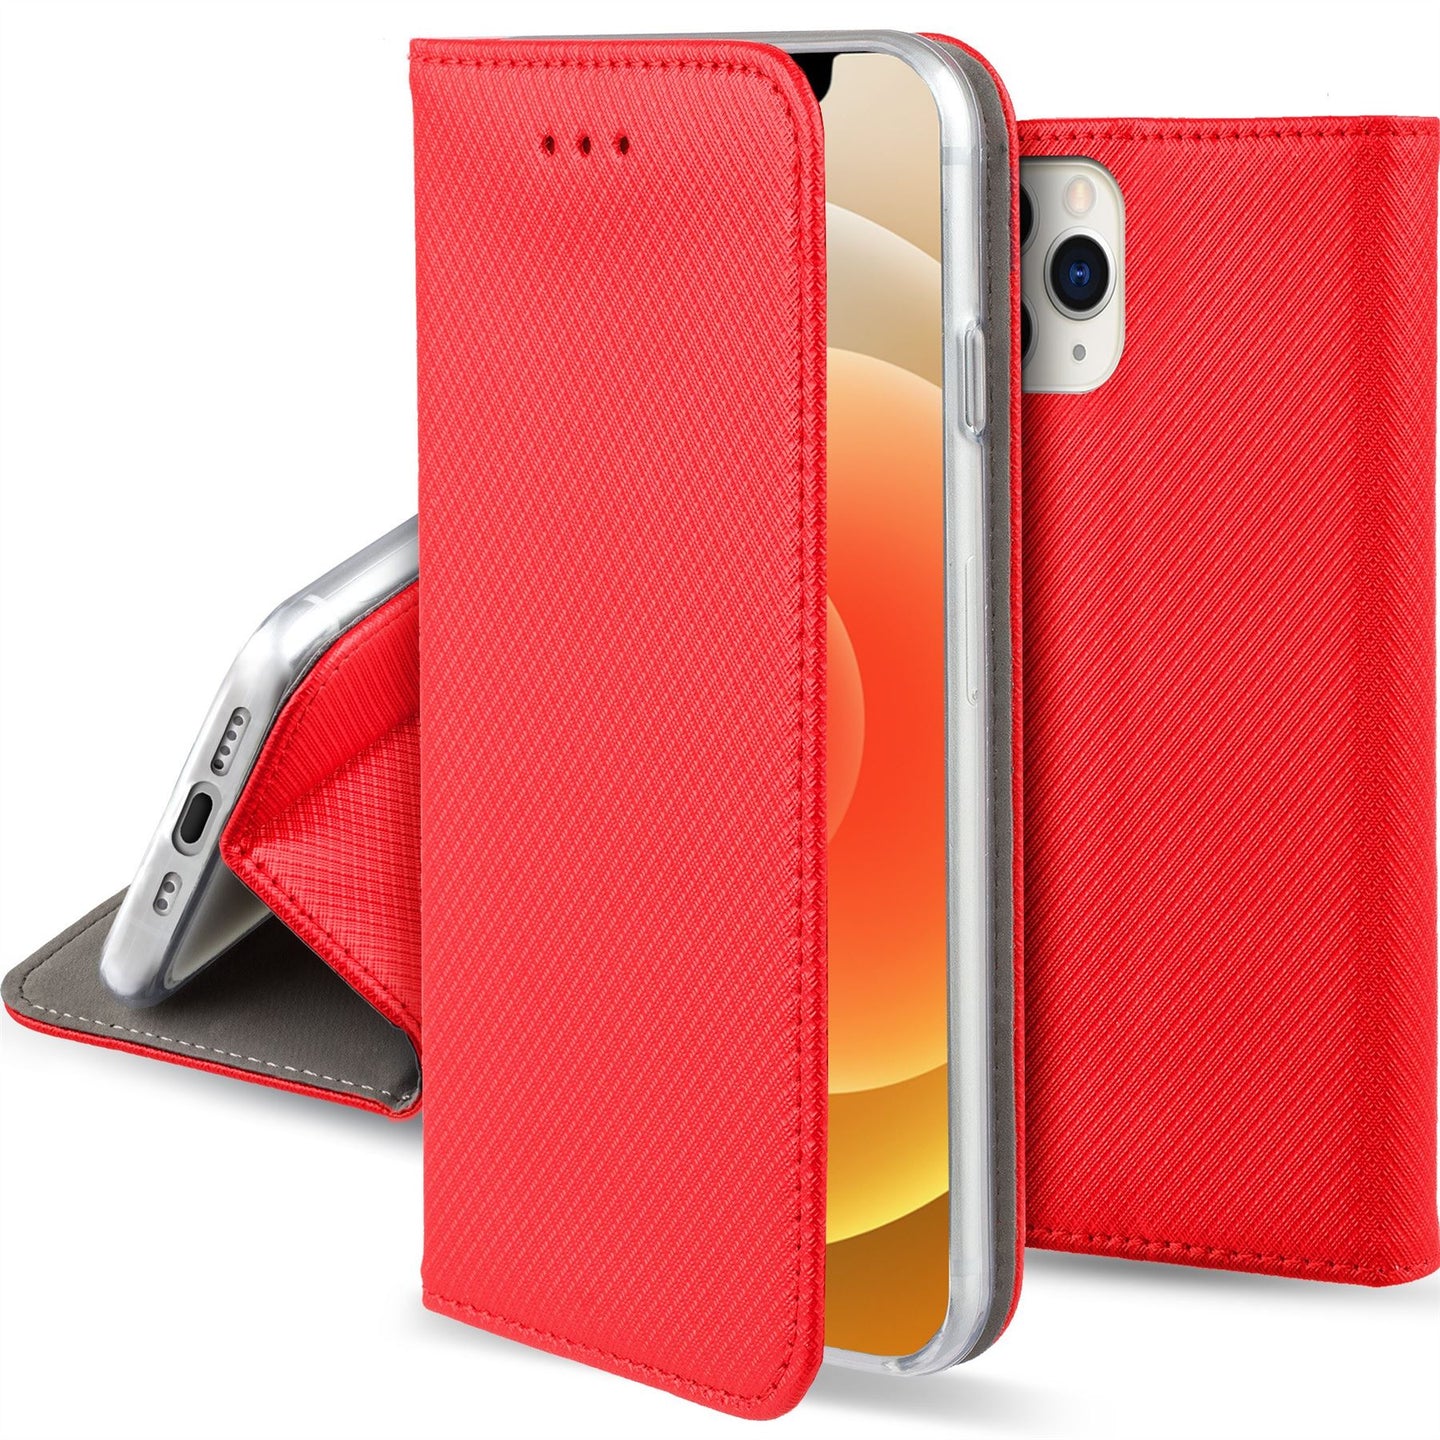 Moozy Case Flip Cover for iPhone 12 Pro Max, Red - Smart Magnetic Flip Case with Card Holder and Stand